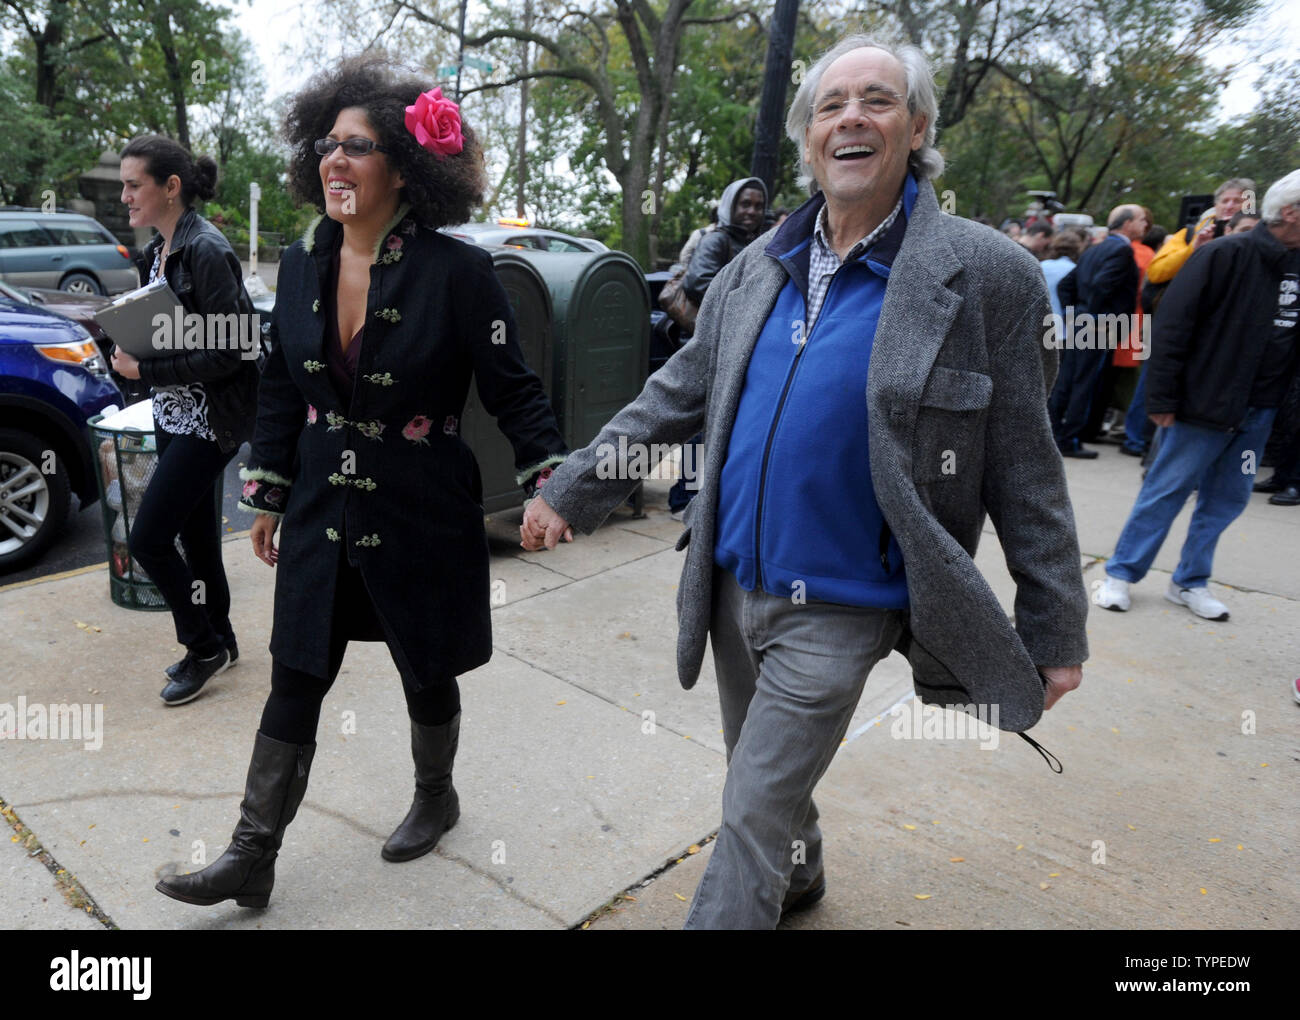 Robert Klein walks on the street at the George Carlin Way Unveiling Ceremony in New York City on October 22, 2014. During a special ceremony Wednesday afternoon, a sign went up on the block naming it 'George Carlin Way'.  The late comedian grew up on West 121st Street between Broadway and Amsterdam in Morningside Heights.       UPI/Dennis Van Tine Stock Photo